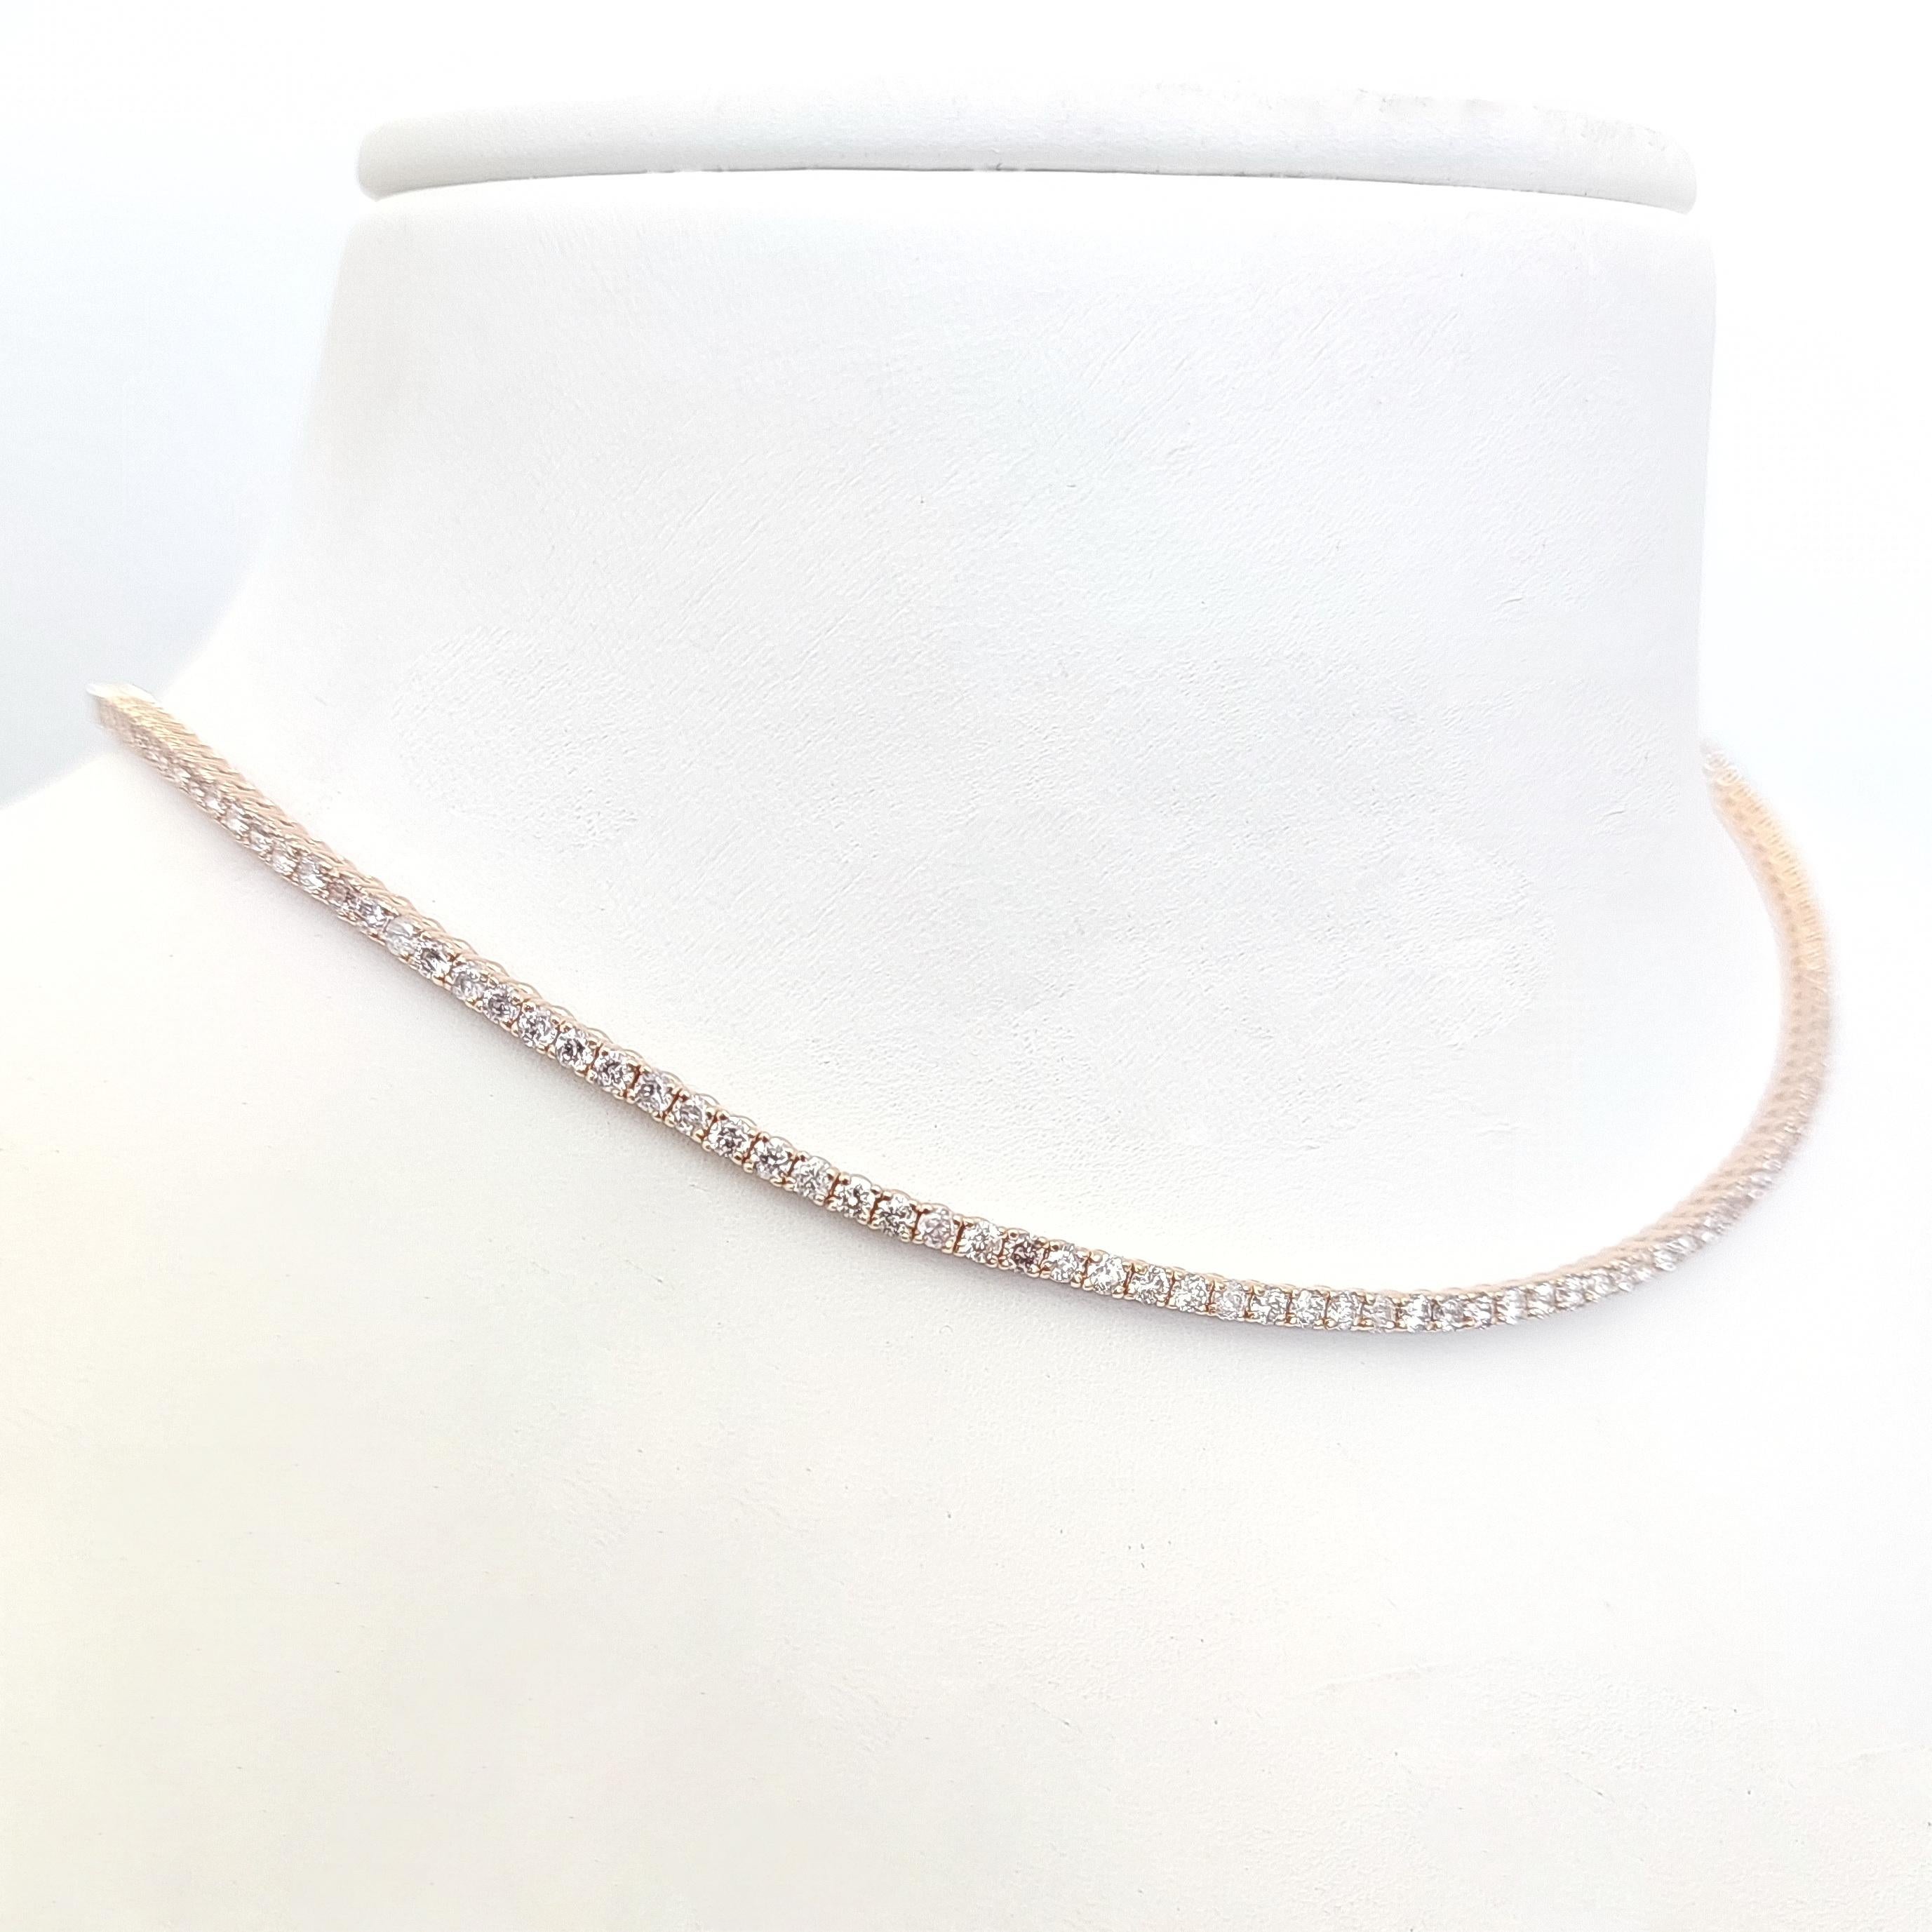 This breathtaking necklace features 162 fancy pink diamonds weighing 4.00 carats and elegantly set in 14kt pink gold. You can wear this elegant necklace when you are dressed up or even casually. 
The necklace is a perfect gift for your loved one.